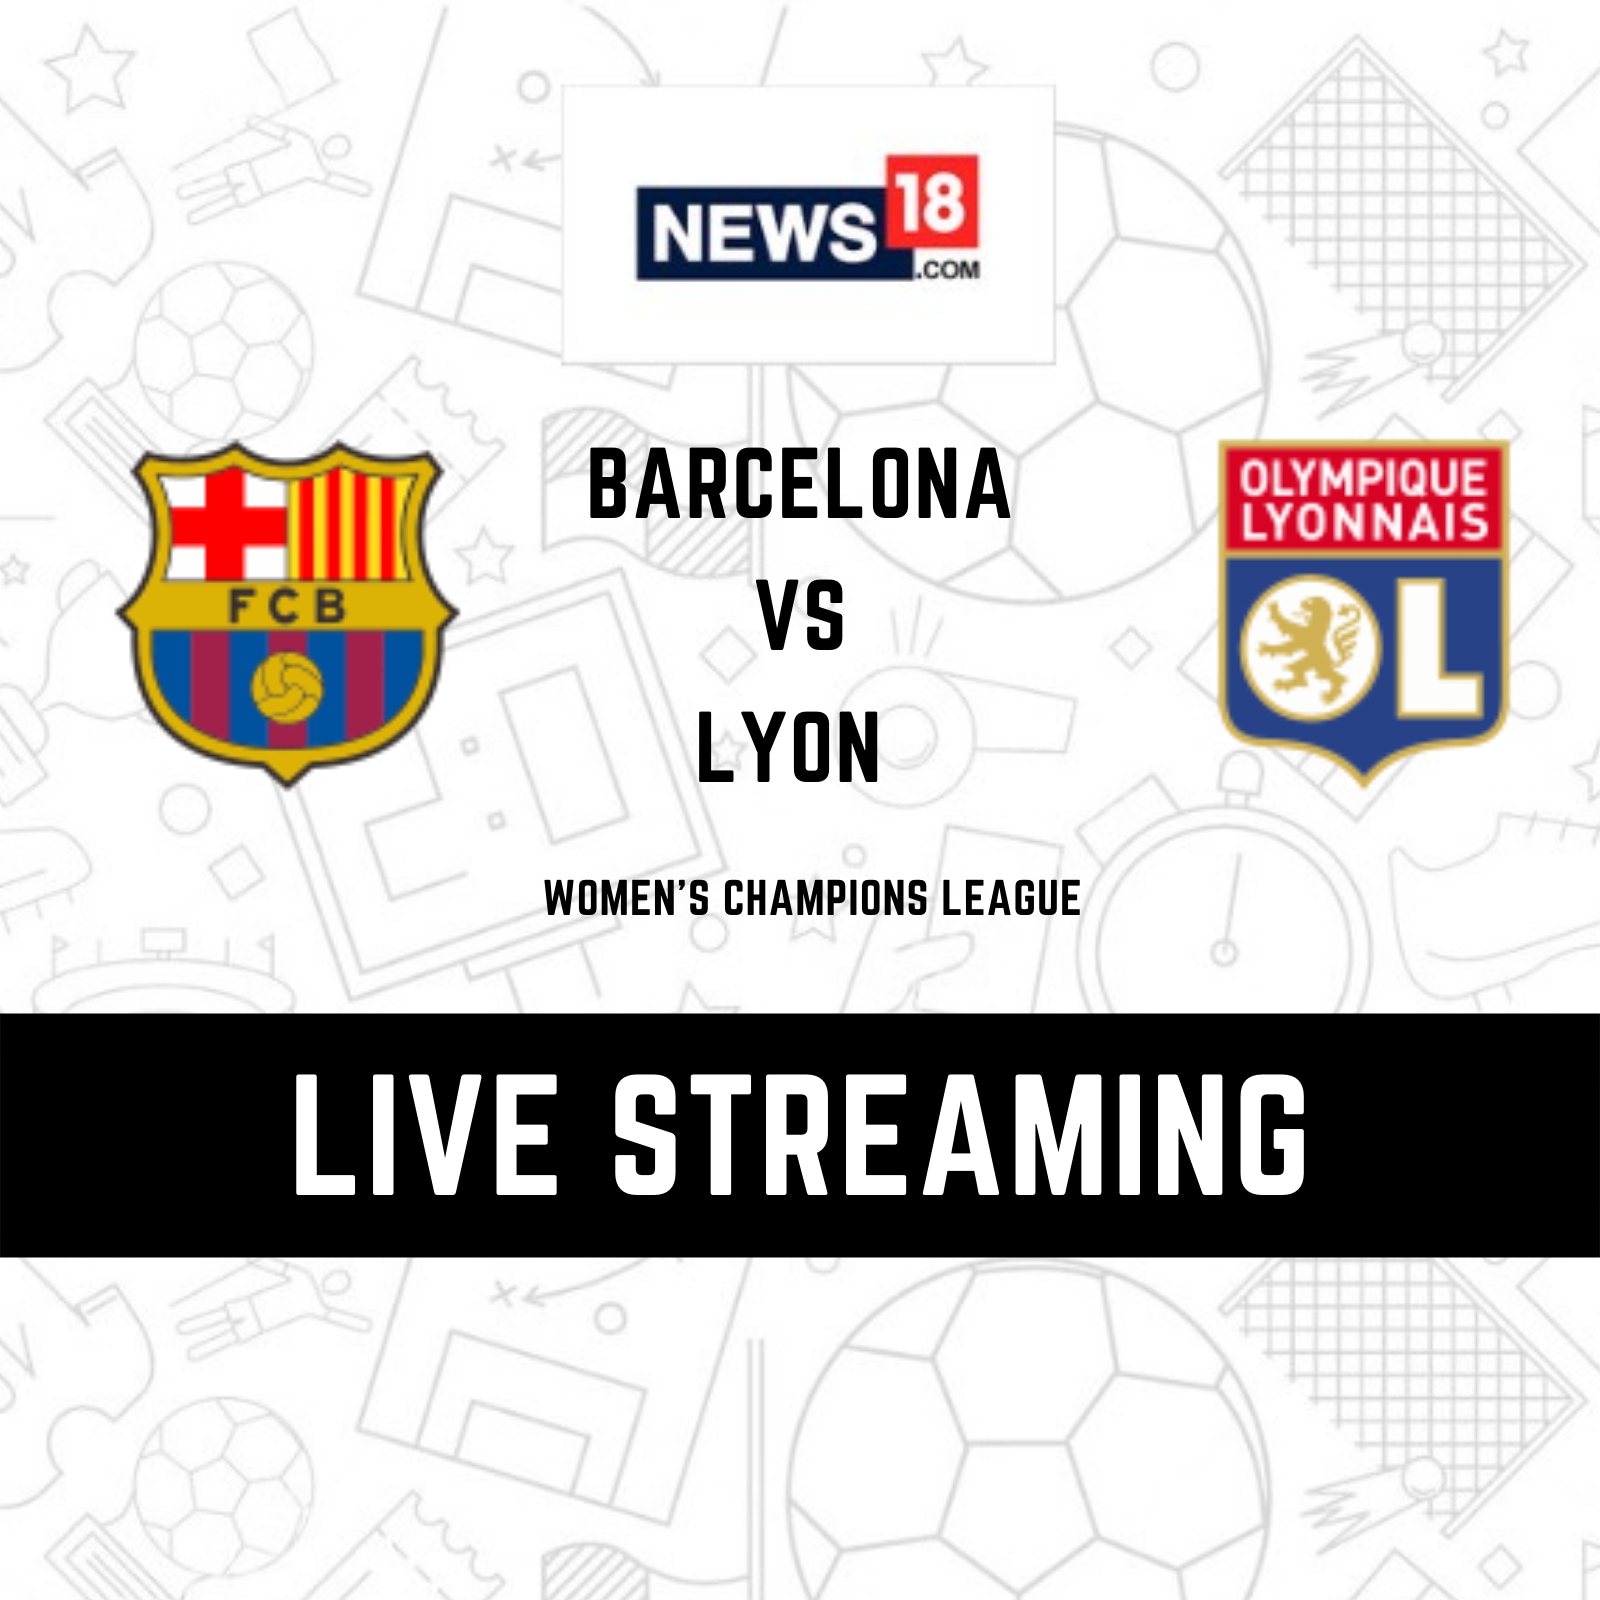 UEFA Champions League 2021-22 Final Barcelona Women vs Lyon Women LIVE Streaming When and Where to Watch Online, TV Telecast, Team News